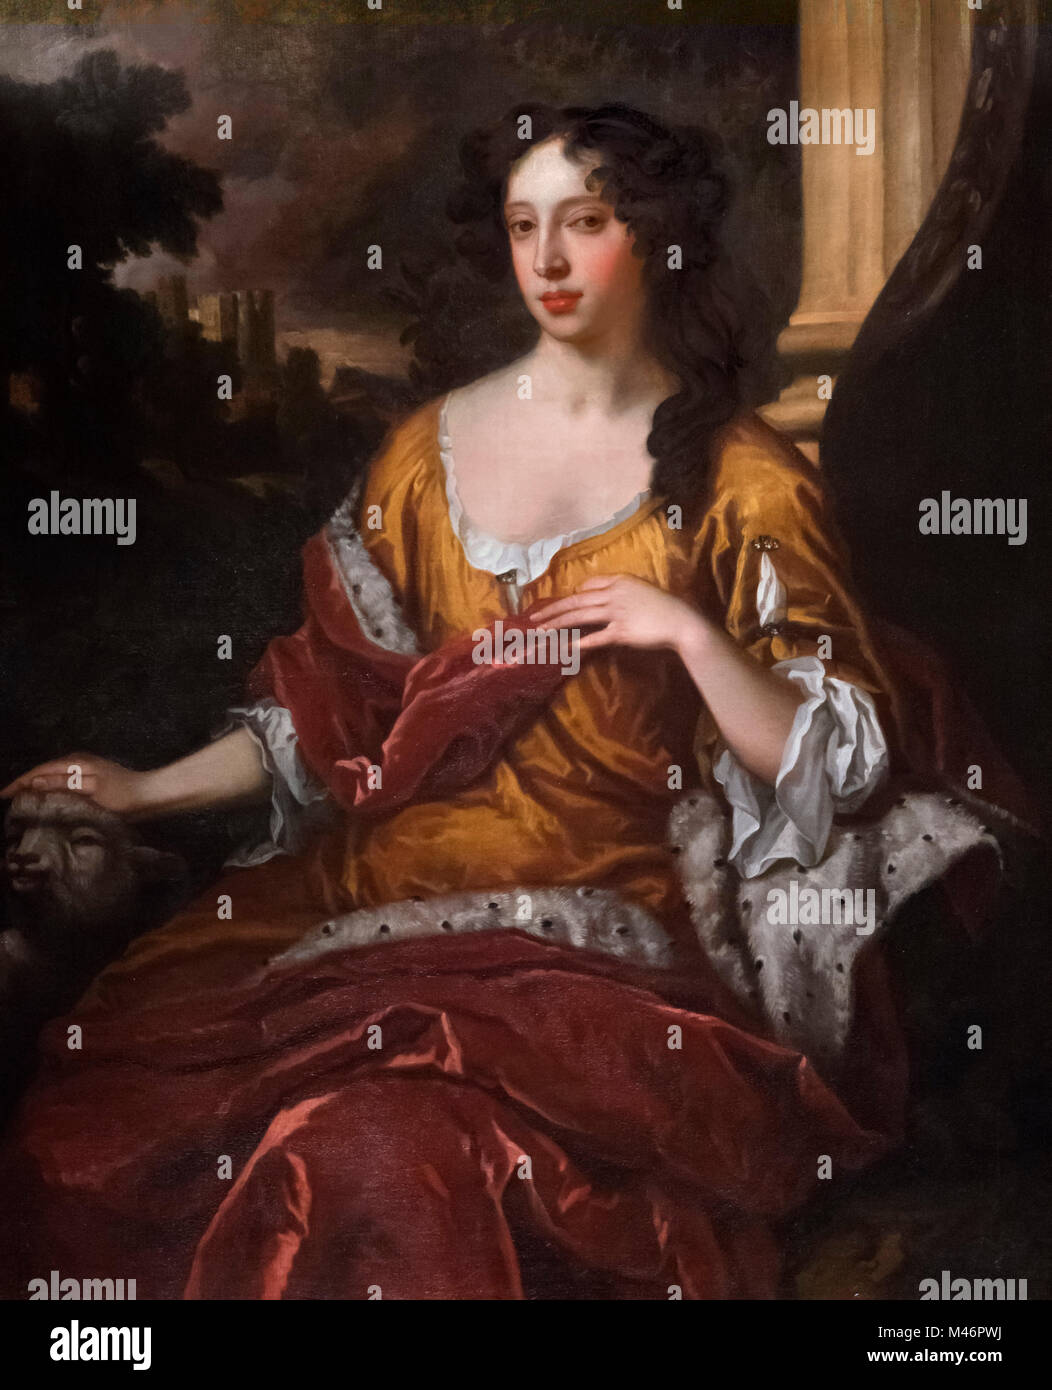 Mary of Modena as Duchess of York (Maria Beatrice Anna Margherita Isabella d'Este; 1658-1718), Queen consort from 1685-1688, as the second wife of James II and VII. Portrait by Sir Peter Lely, oil on canvas, 1675-80 Stock Photo